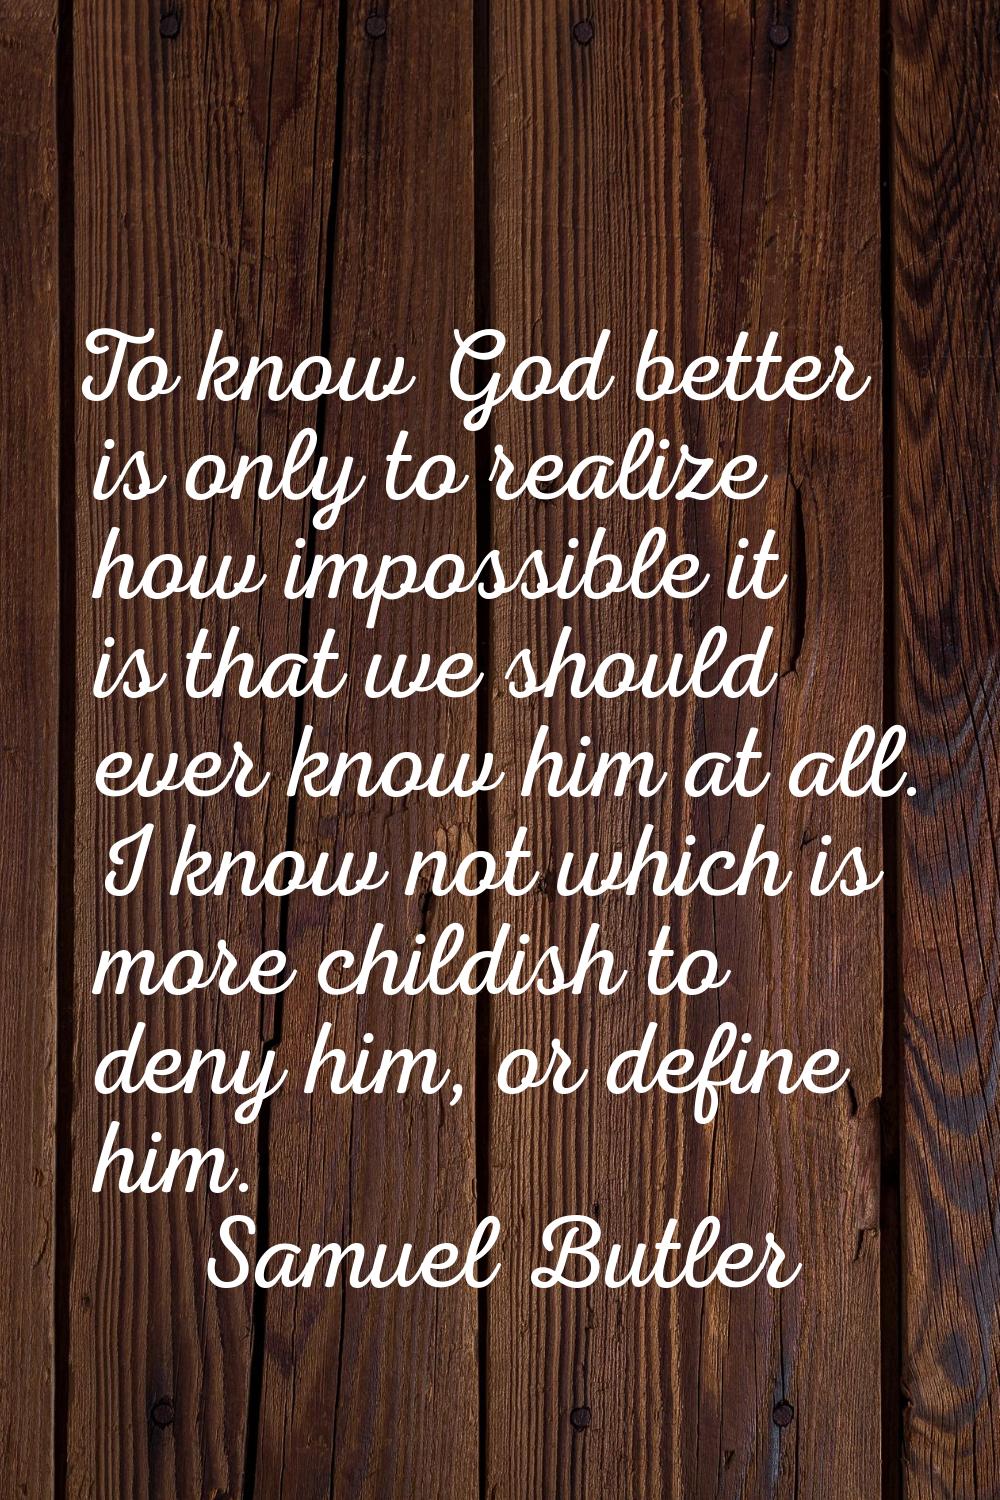 To know God better is only to realize how impossible it is that we should ever know him at all. I k